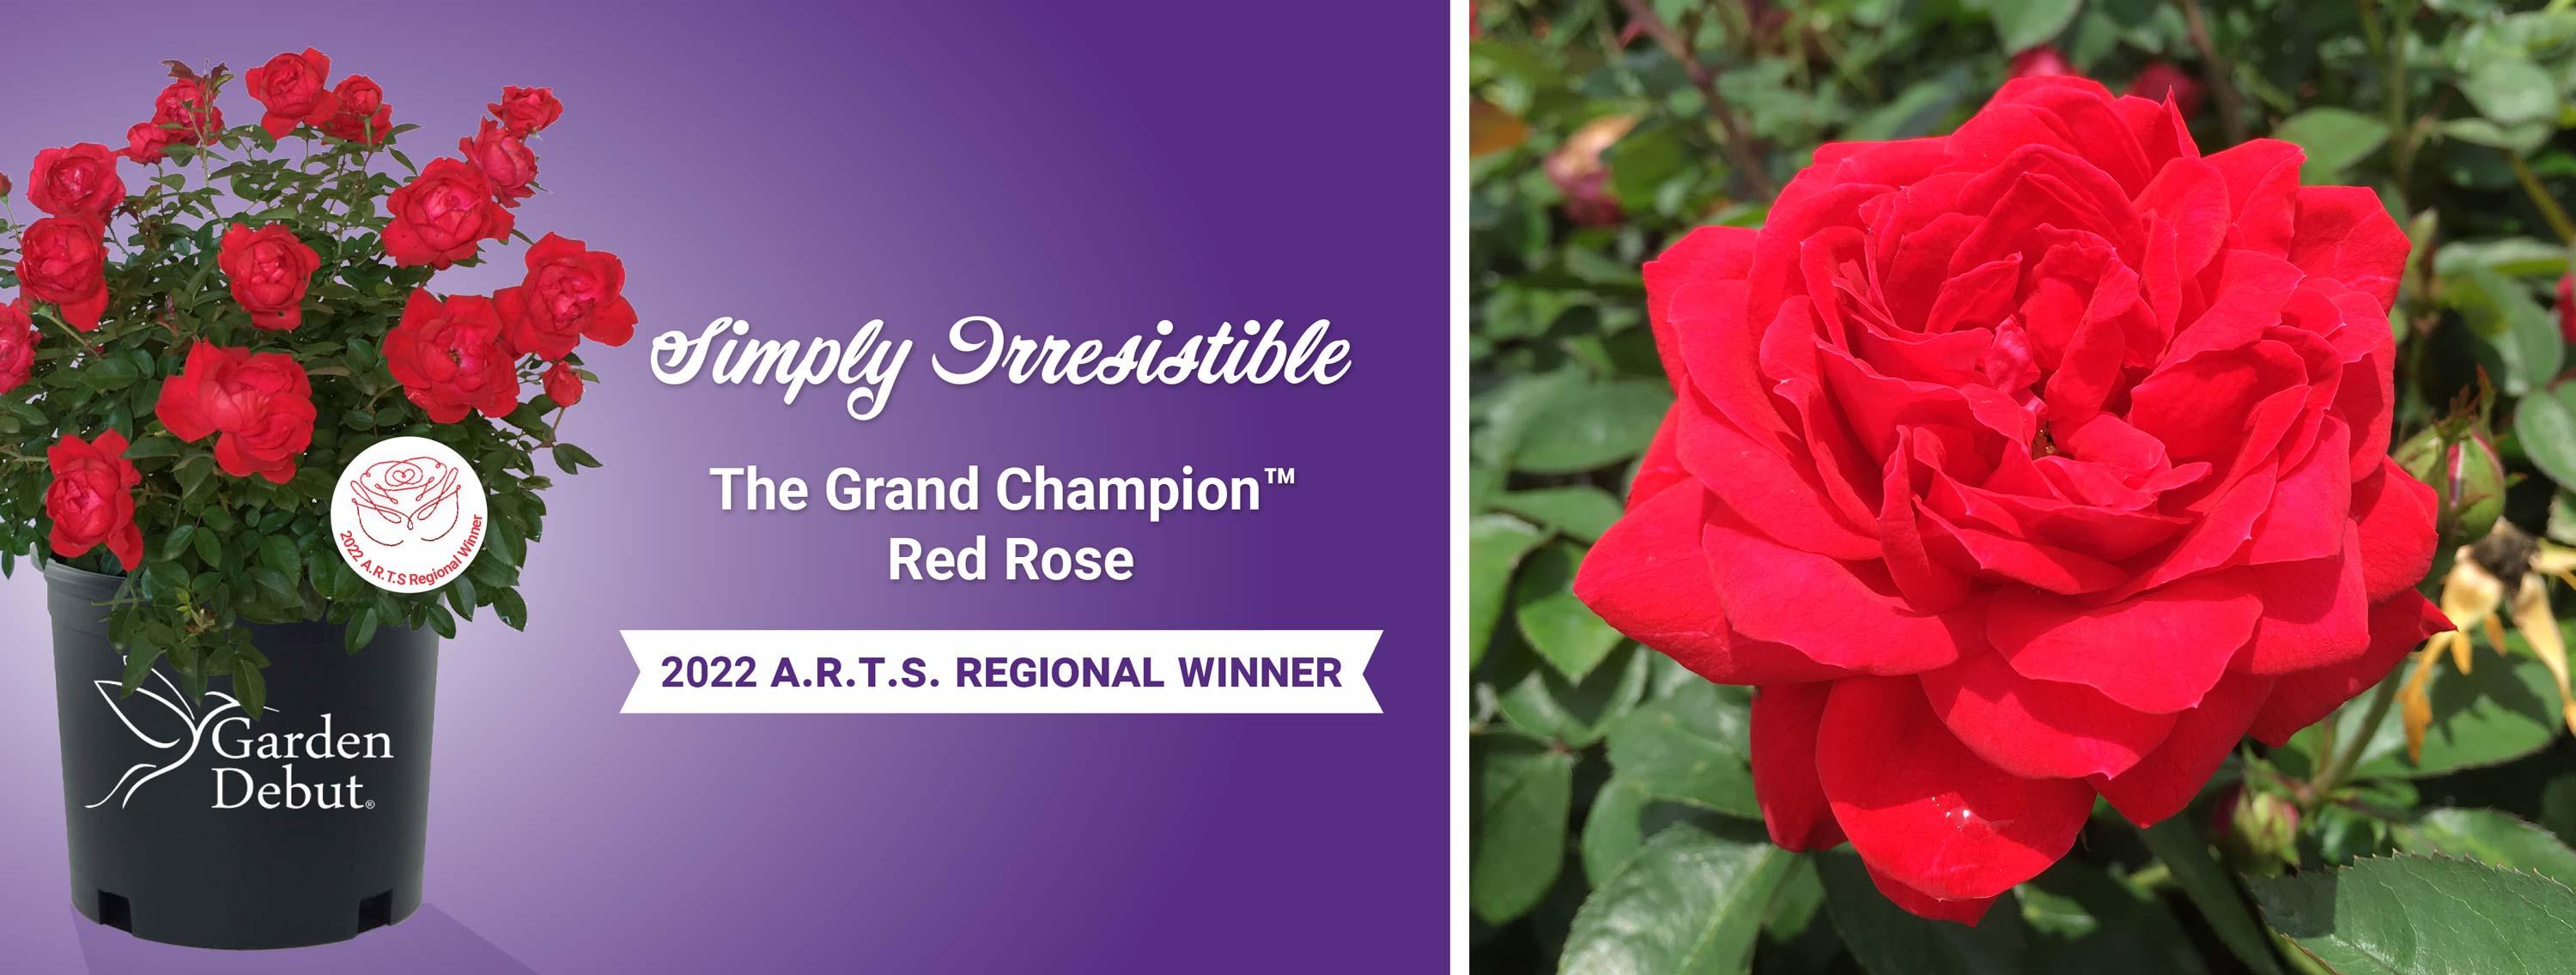 The Grand Champion Red Rose.